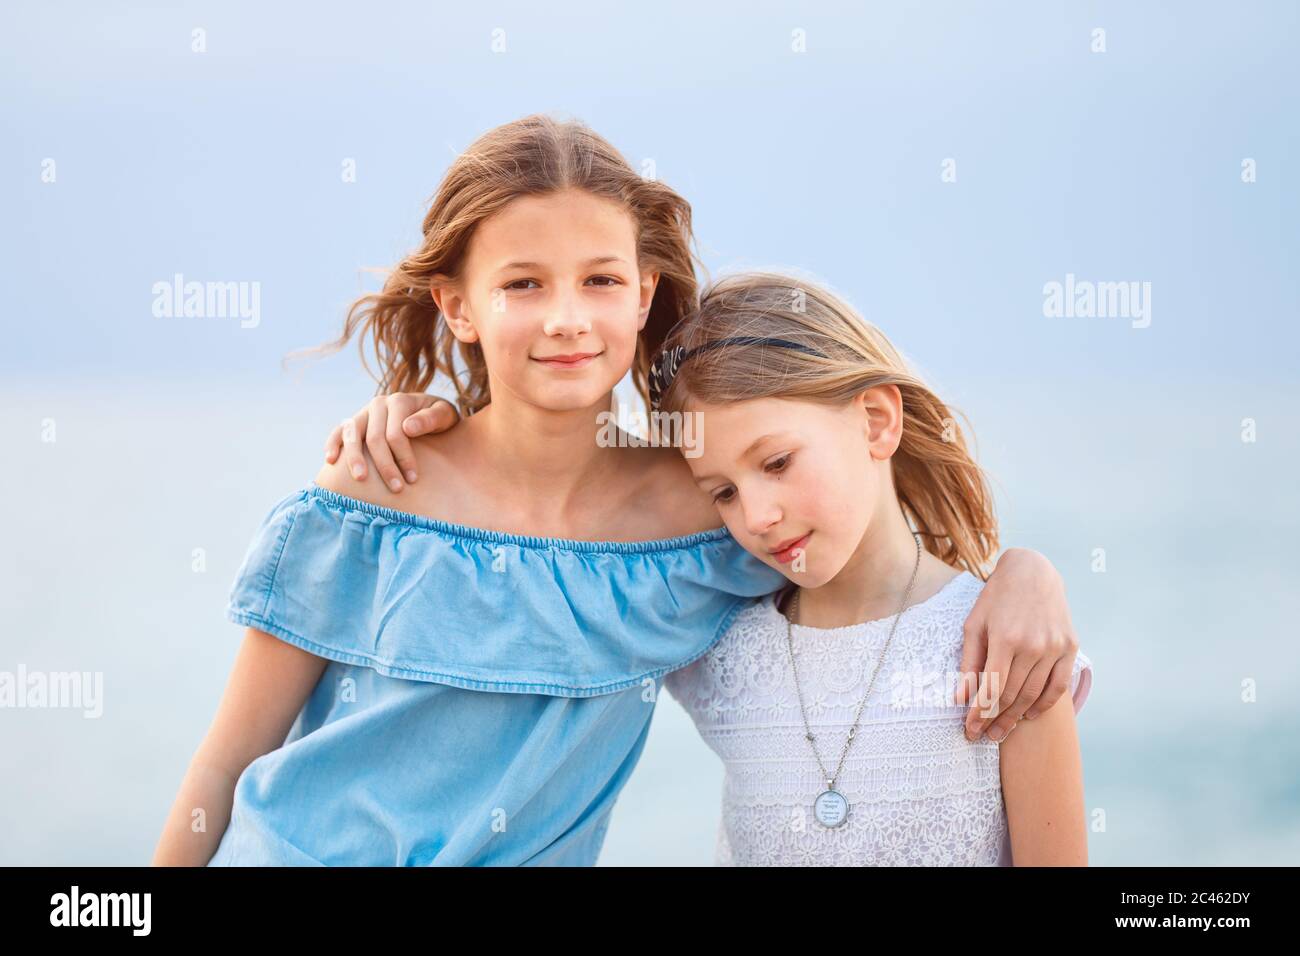 Two young girls wearing casual summer clothing looking, smiling at camera in a coastal region Stock Photo